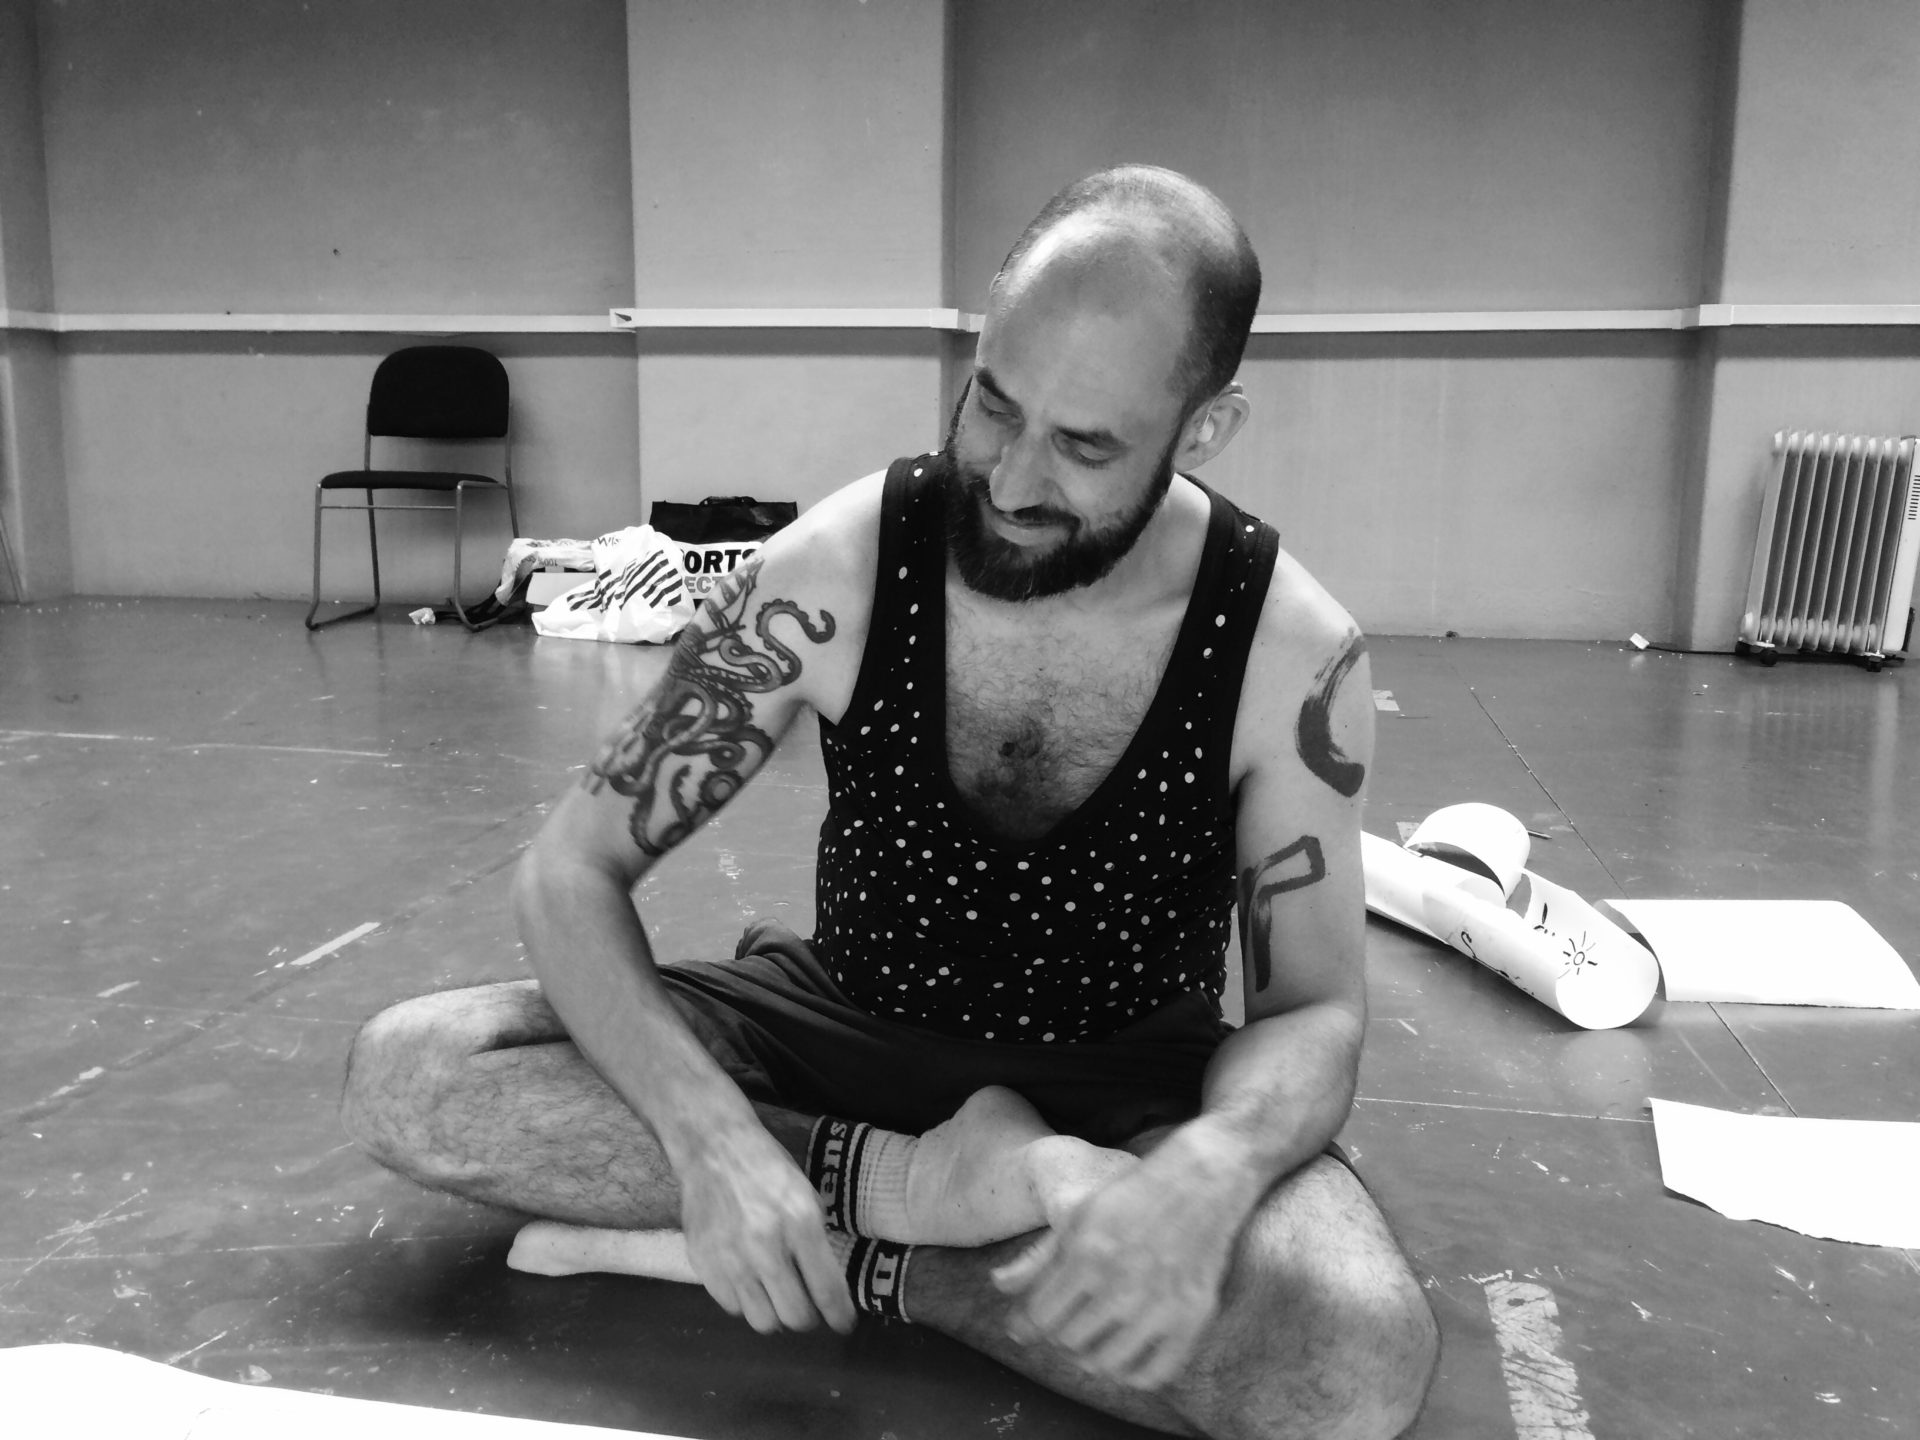 Jonny sits happily cross legged on the floor looking at some paper he's about to draw on